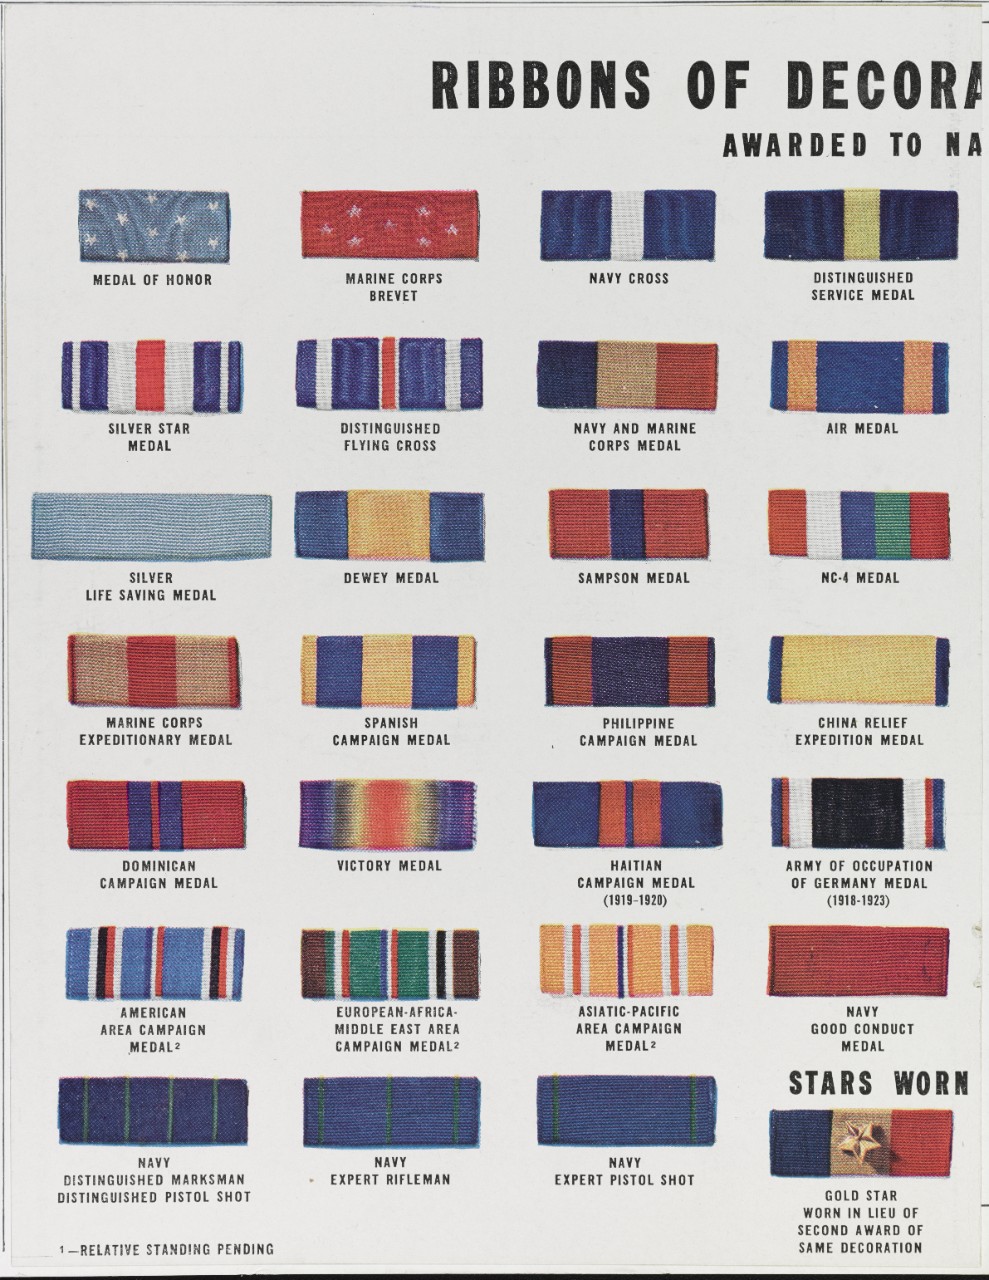 NH 115616 Ribbons of Decorations and medals for Naval personnel, as of 1942.